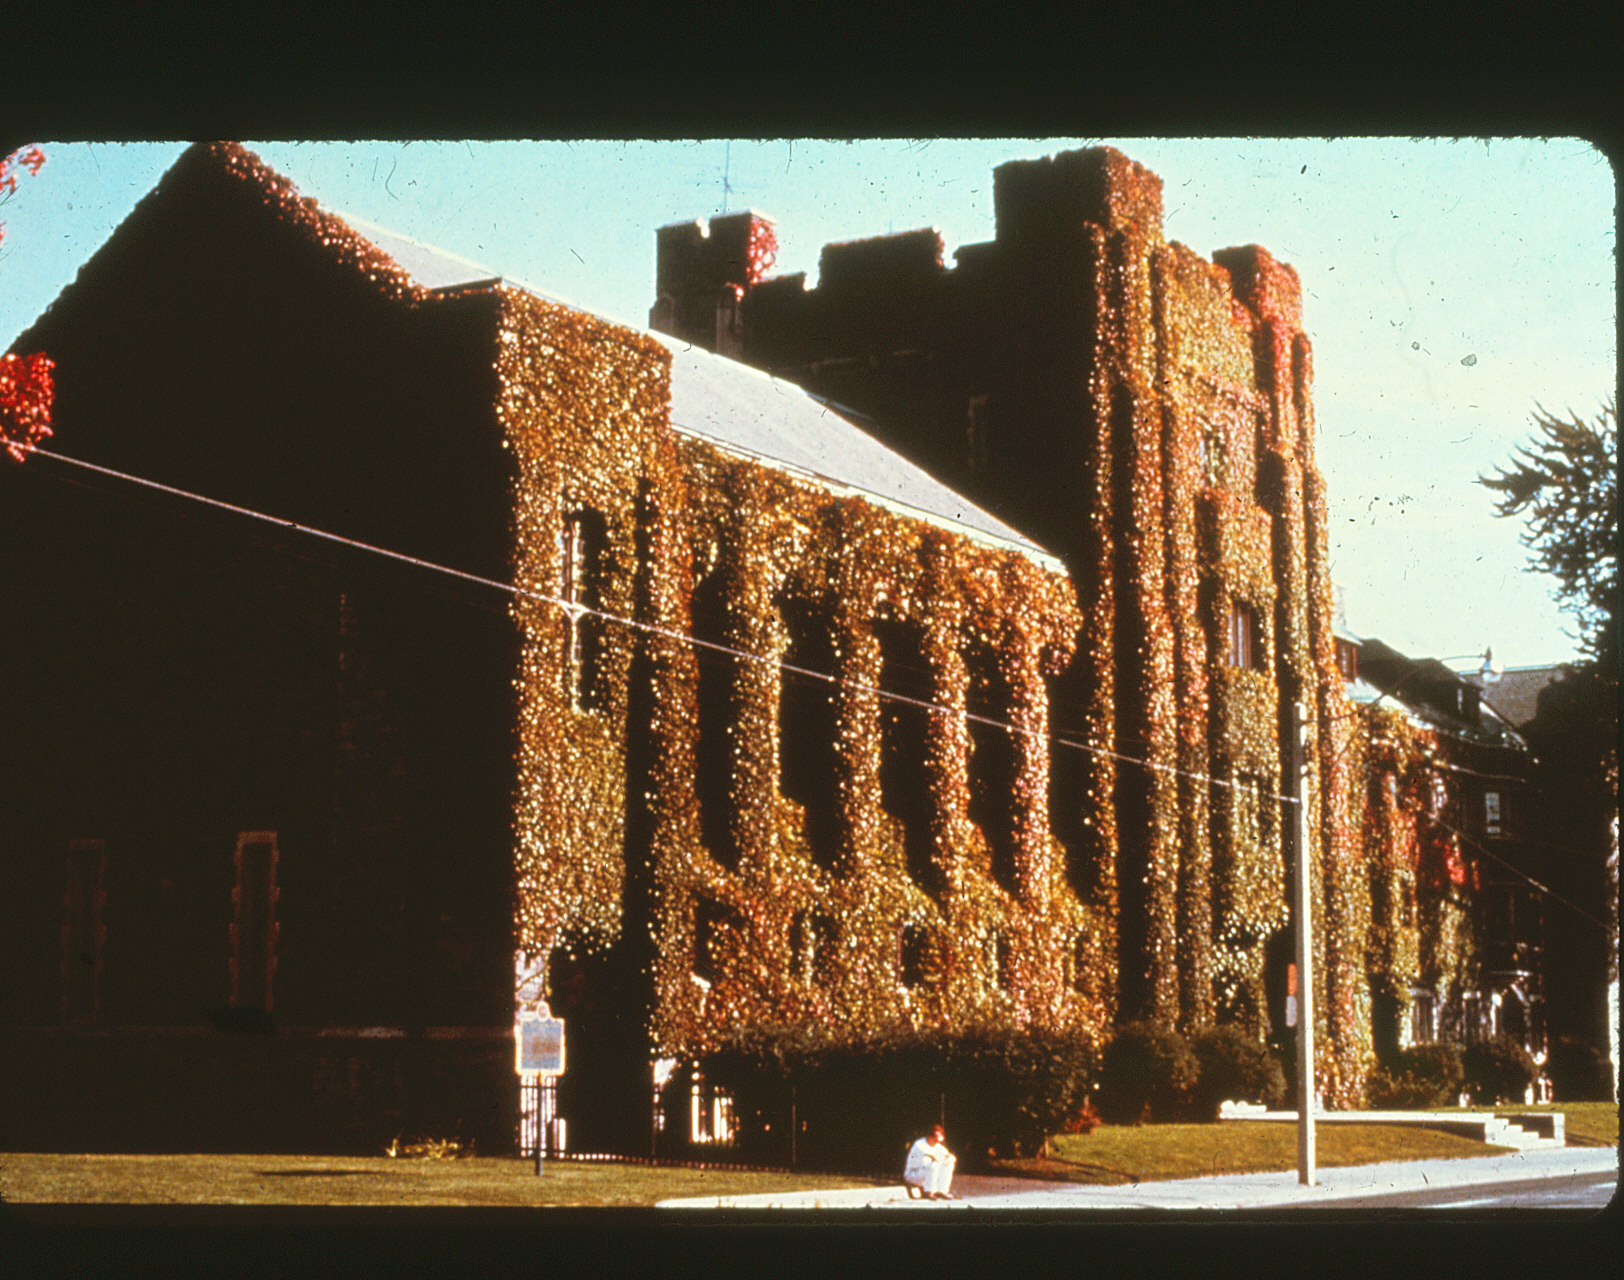 The Ivy was removed from the College in the 70's for preservation reasons